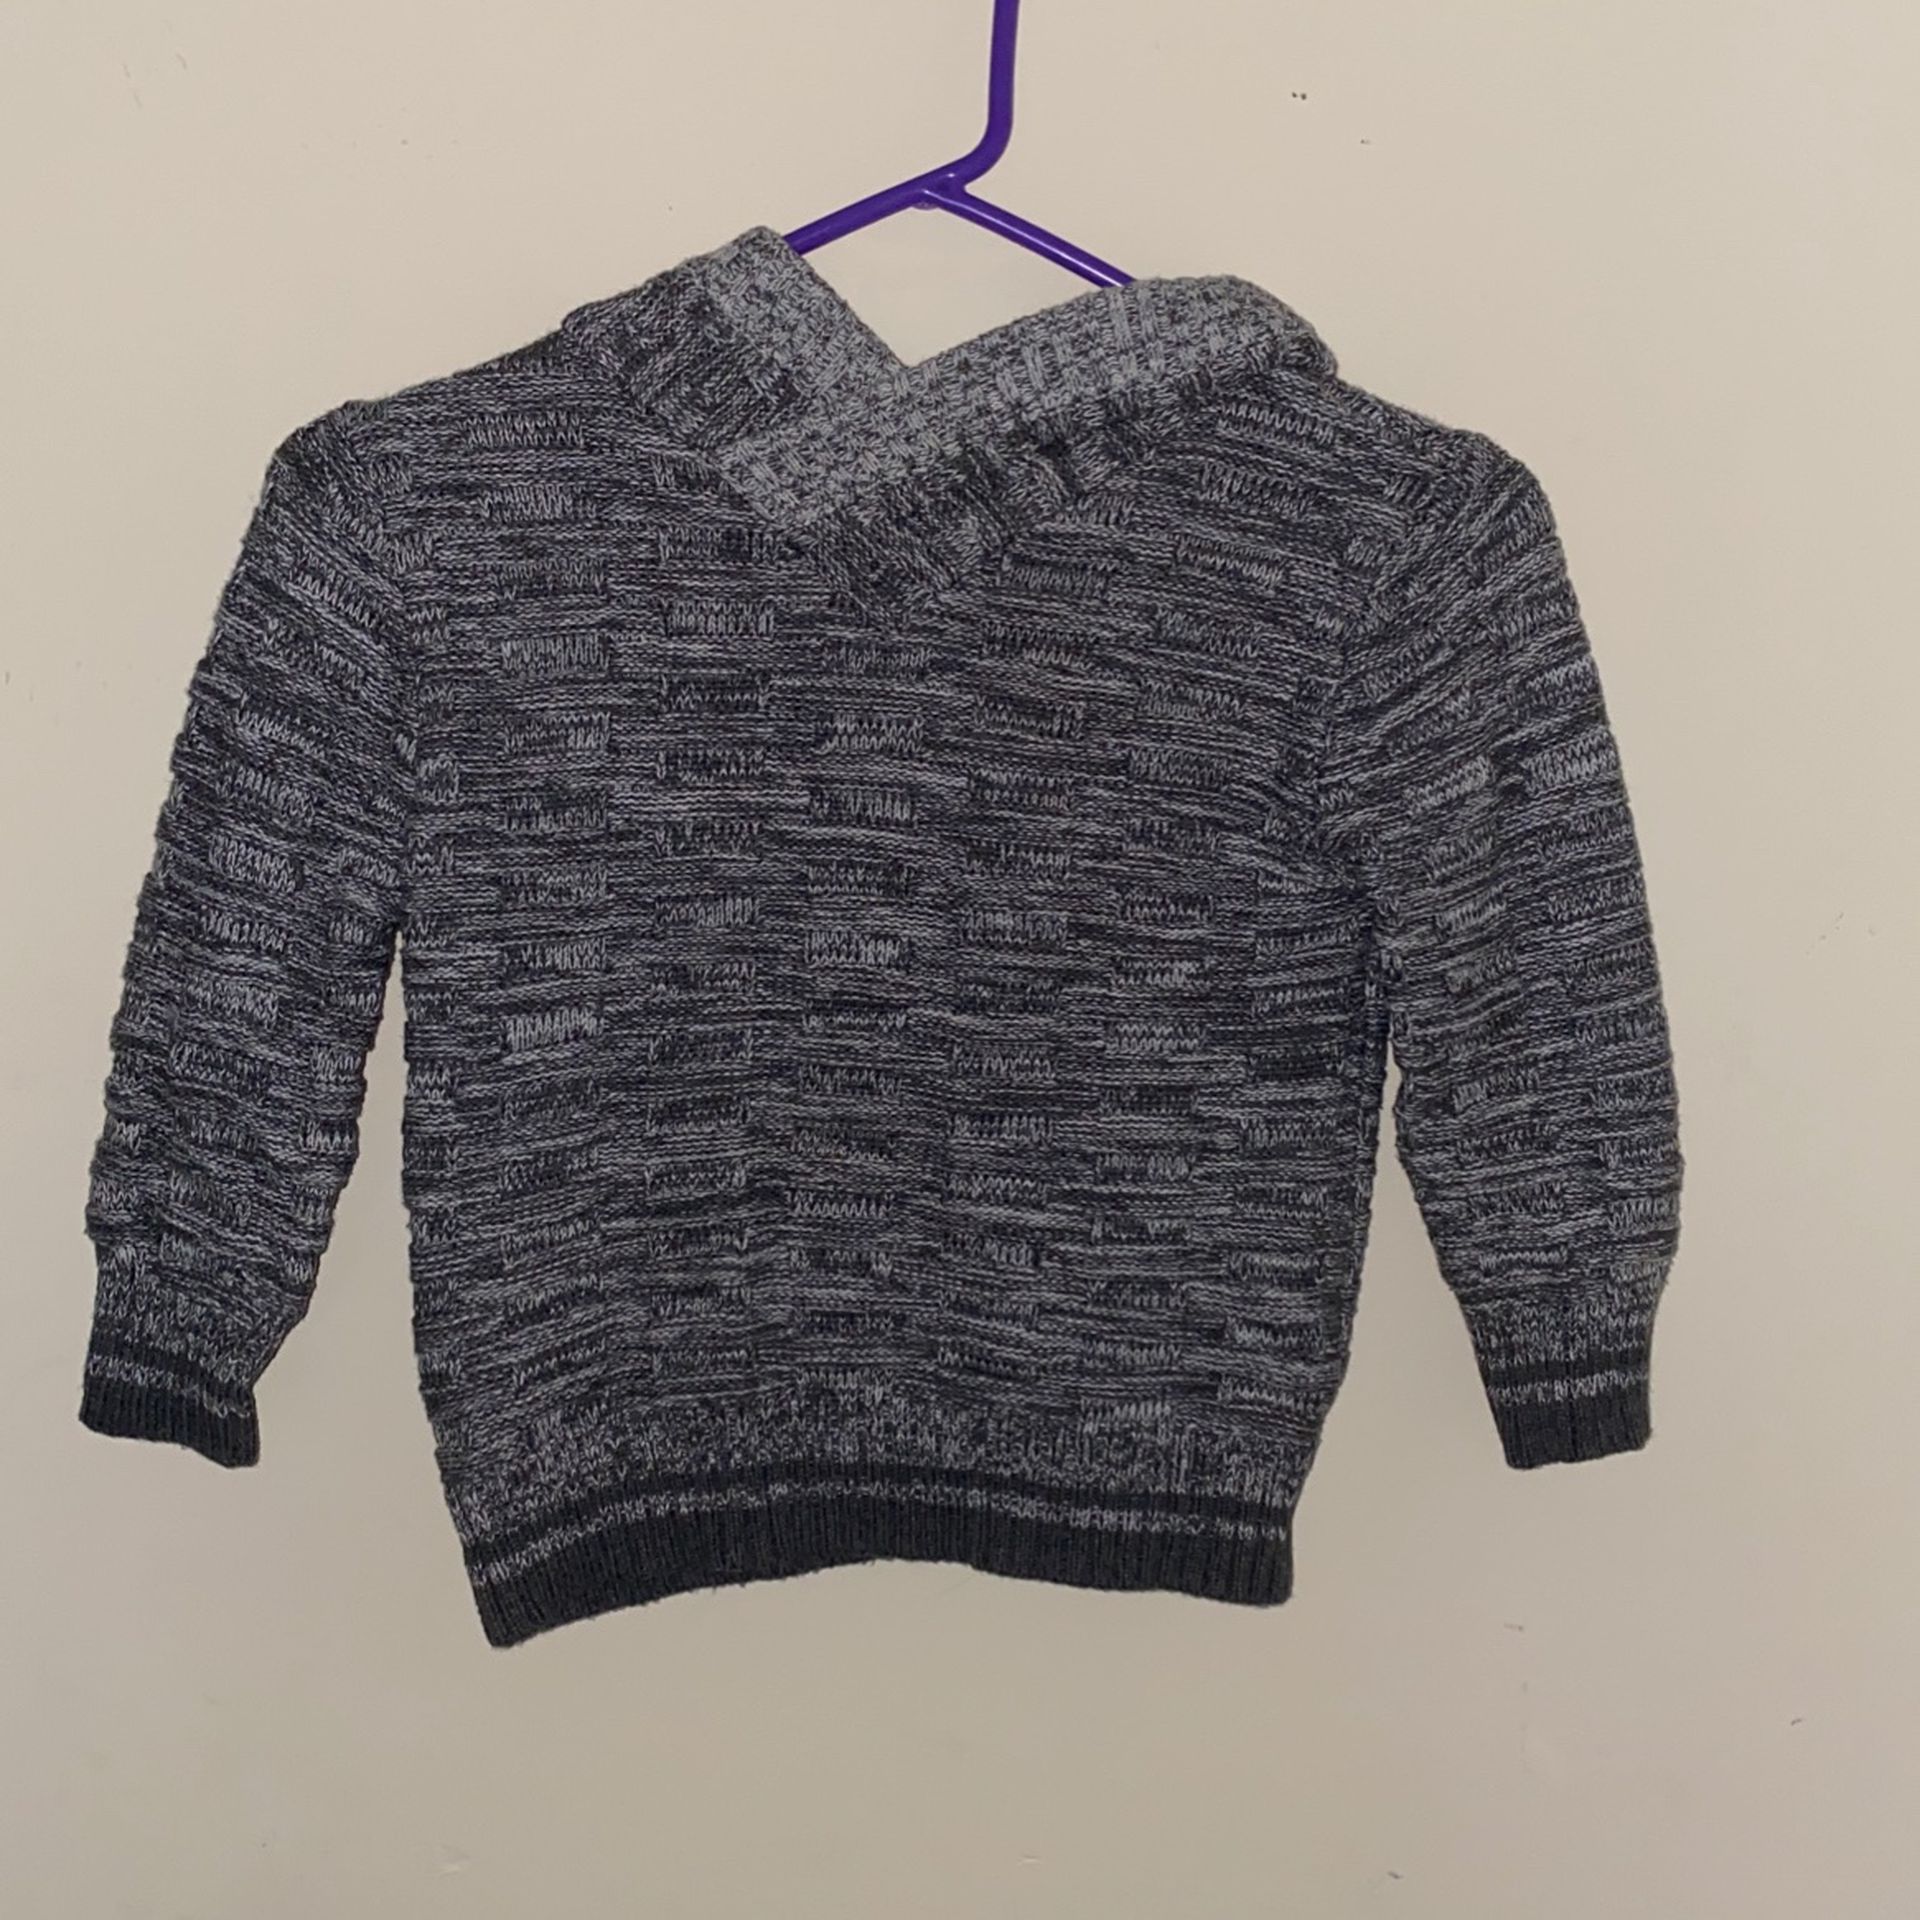 4t Sweater/shirt For Kids